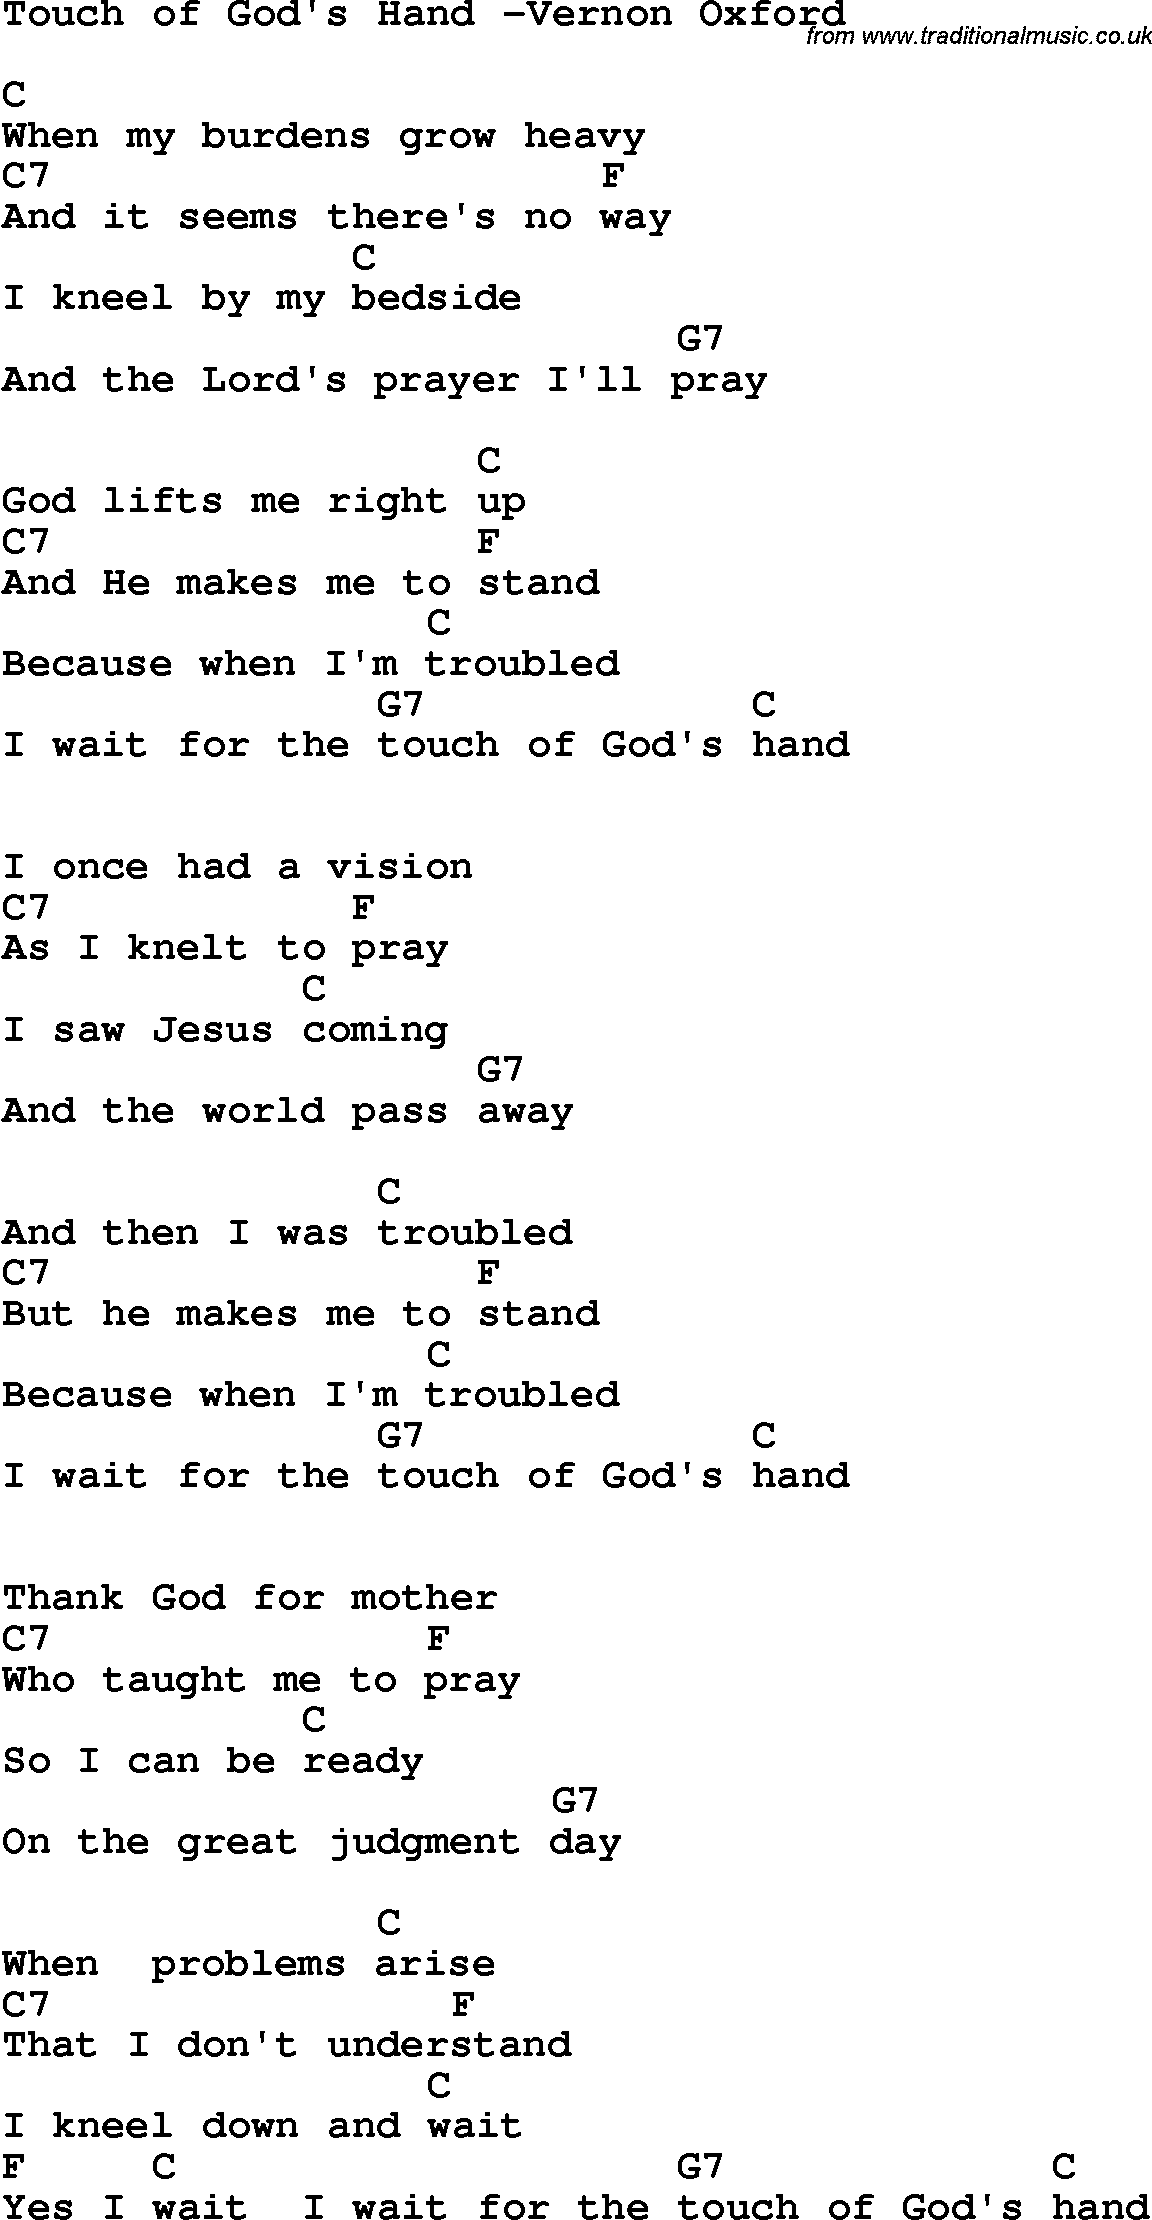 Country, Southern and Bluegrass Gospel Song Touch of God's Hand -Vernon Oxford lyrics and chords